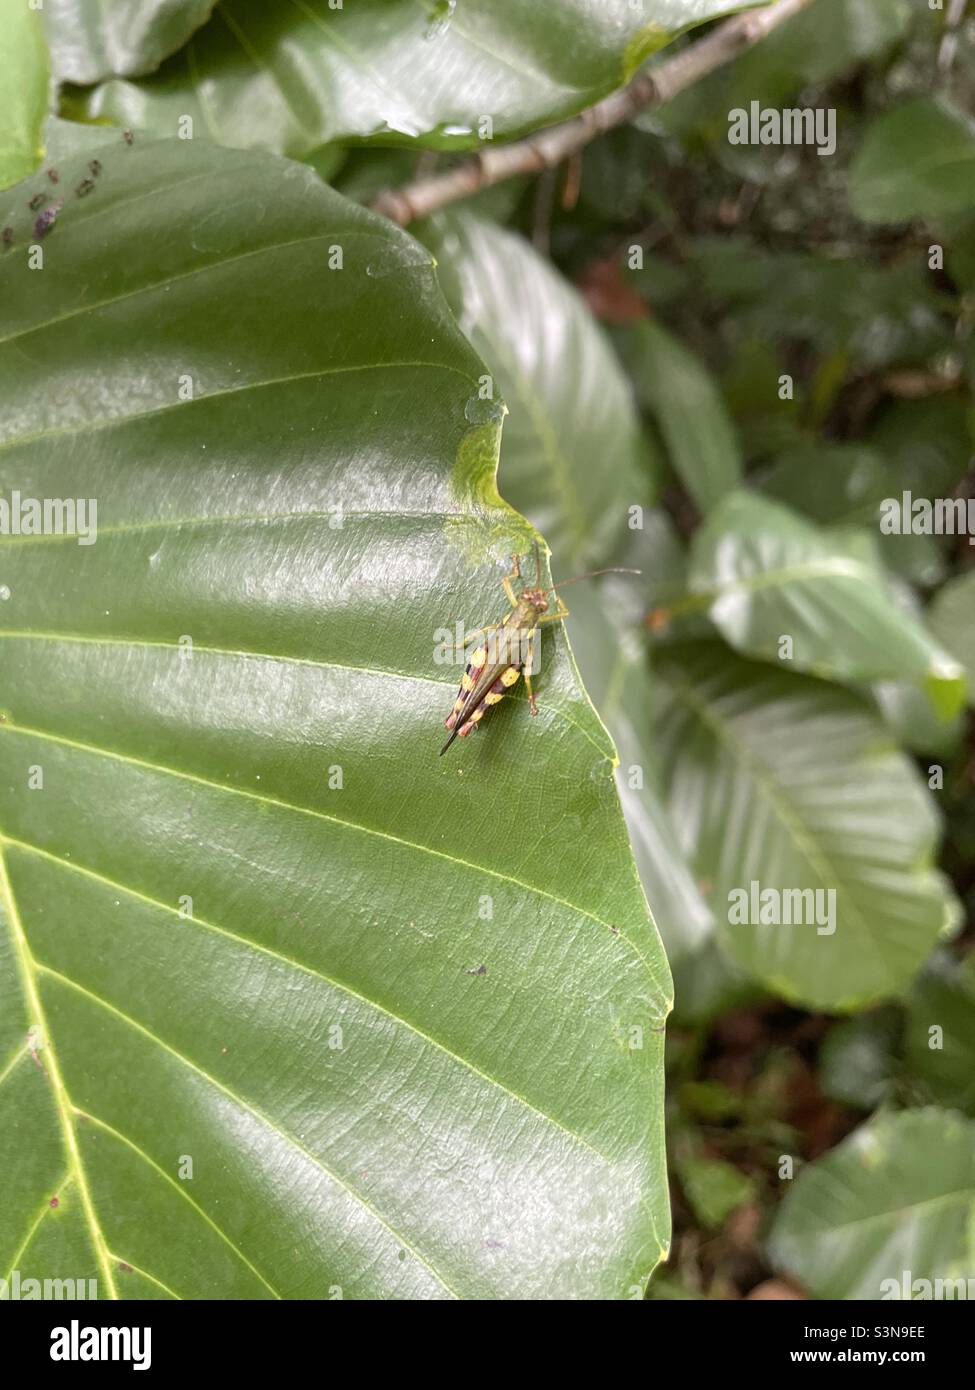 Crouching insect on a leaf Stock Photo